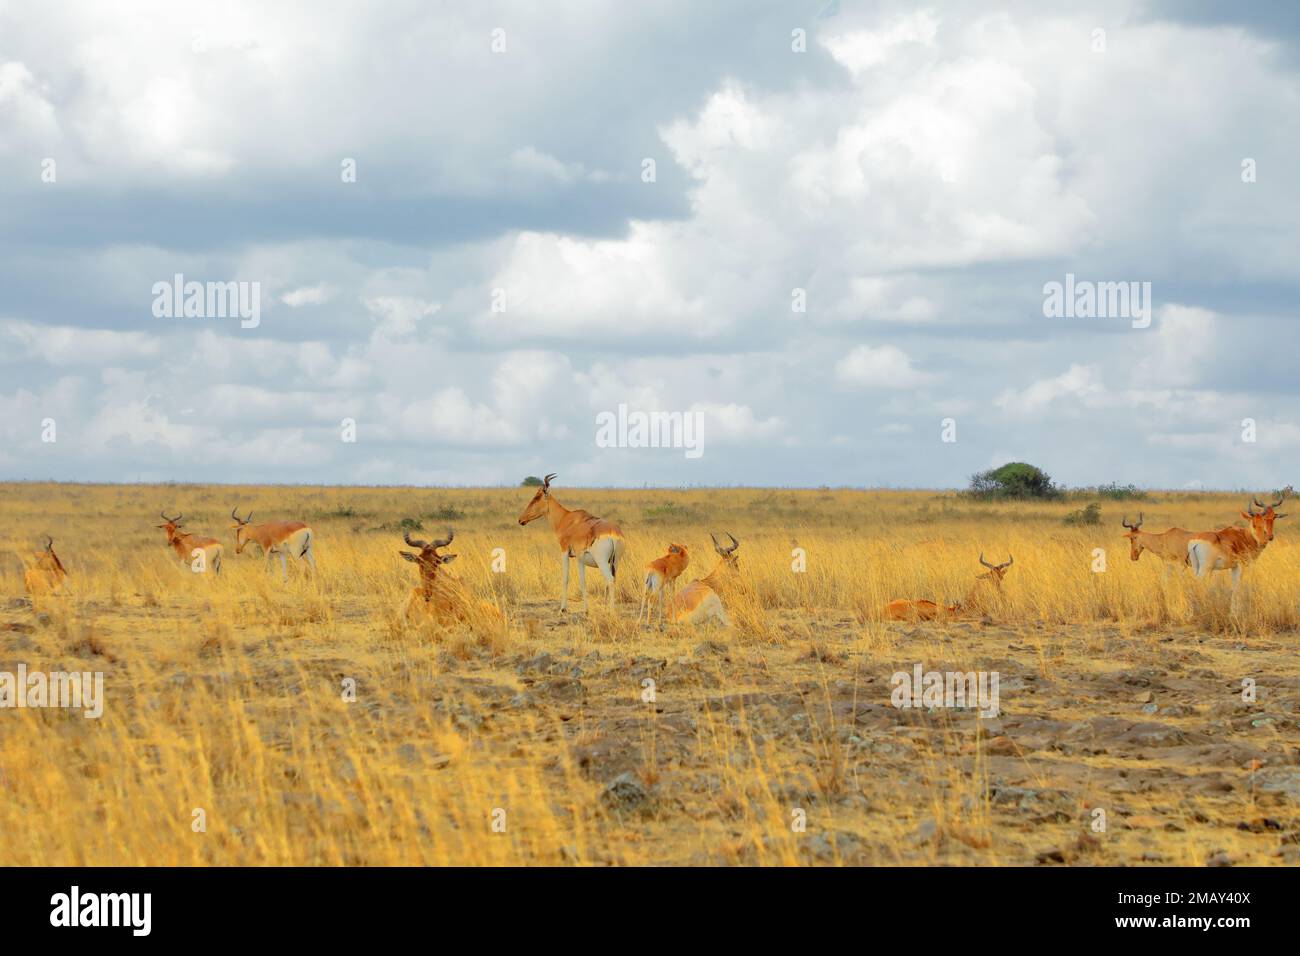 A group of many Haartbeast laying down and standing in the grass within Nairobi National Park from a wide angle perspective. Stock Photo